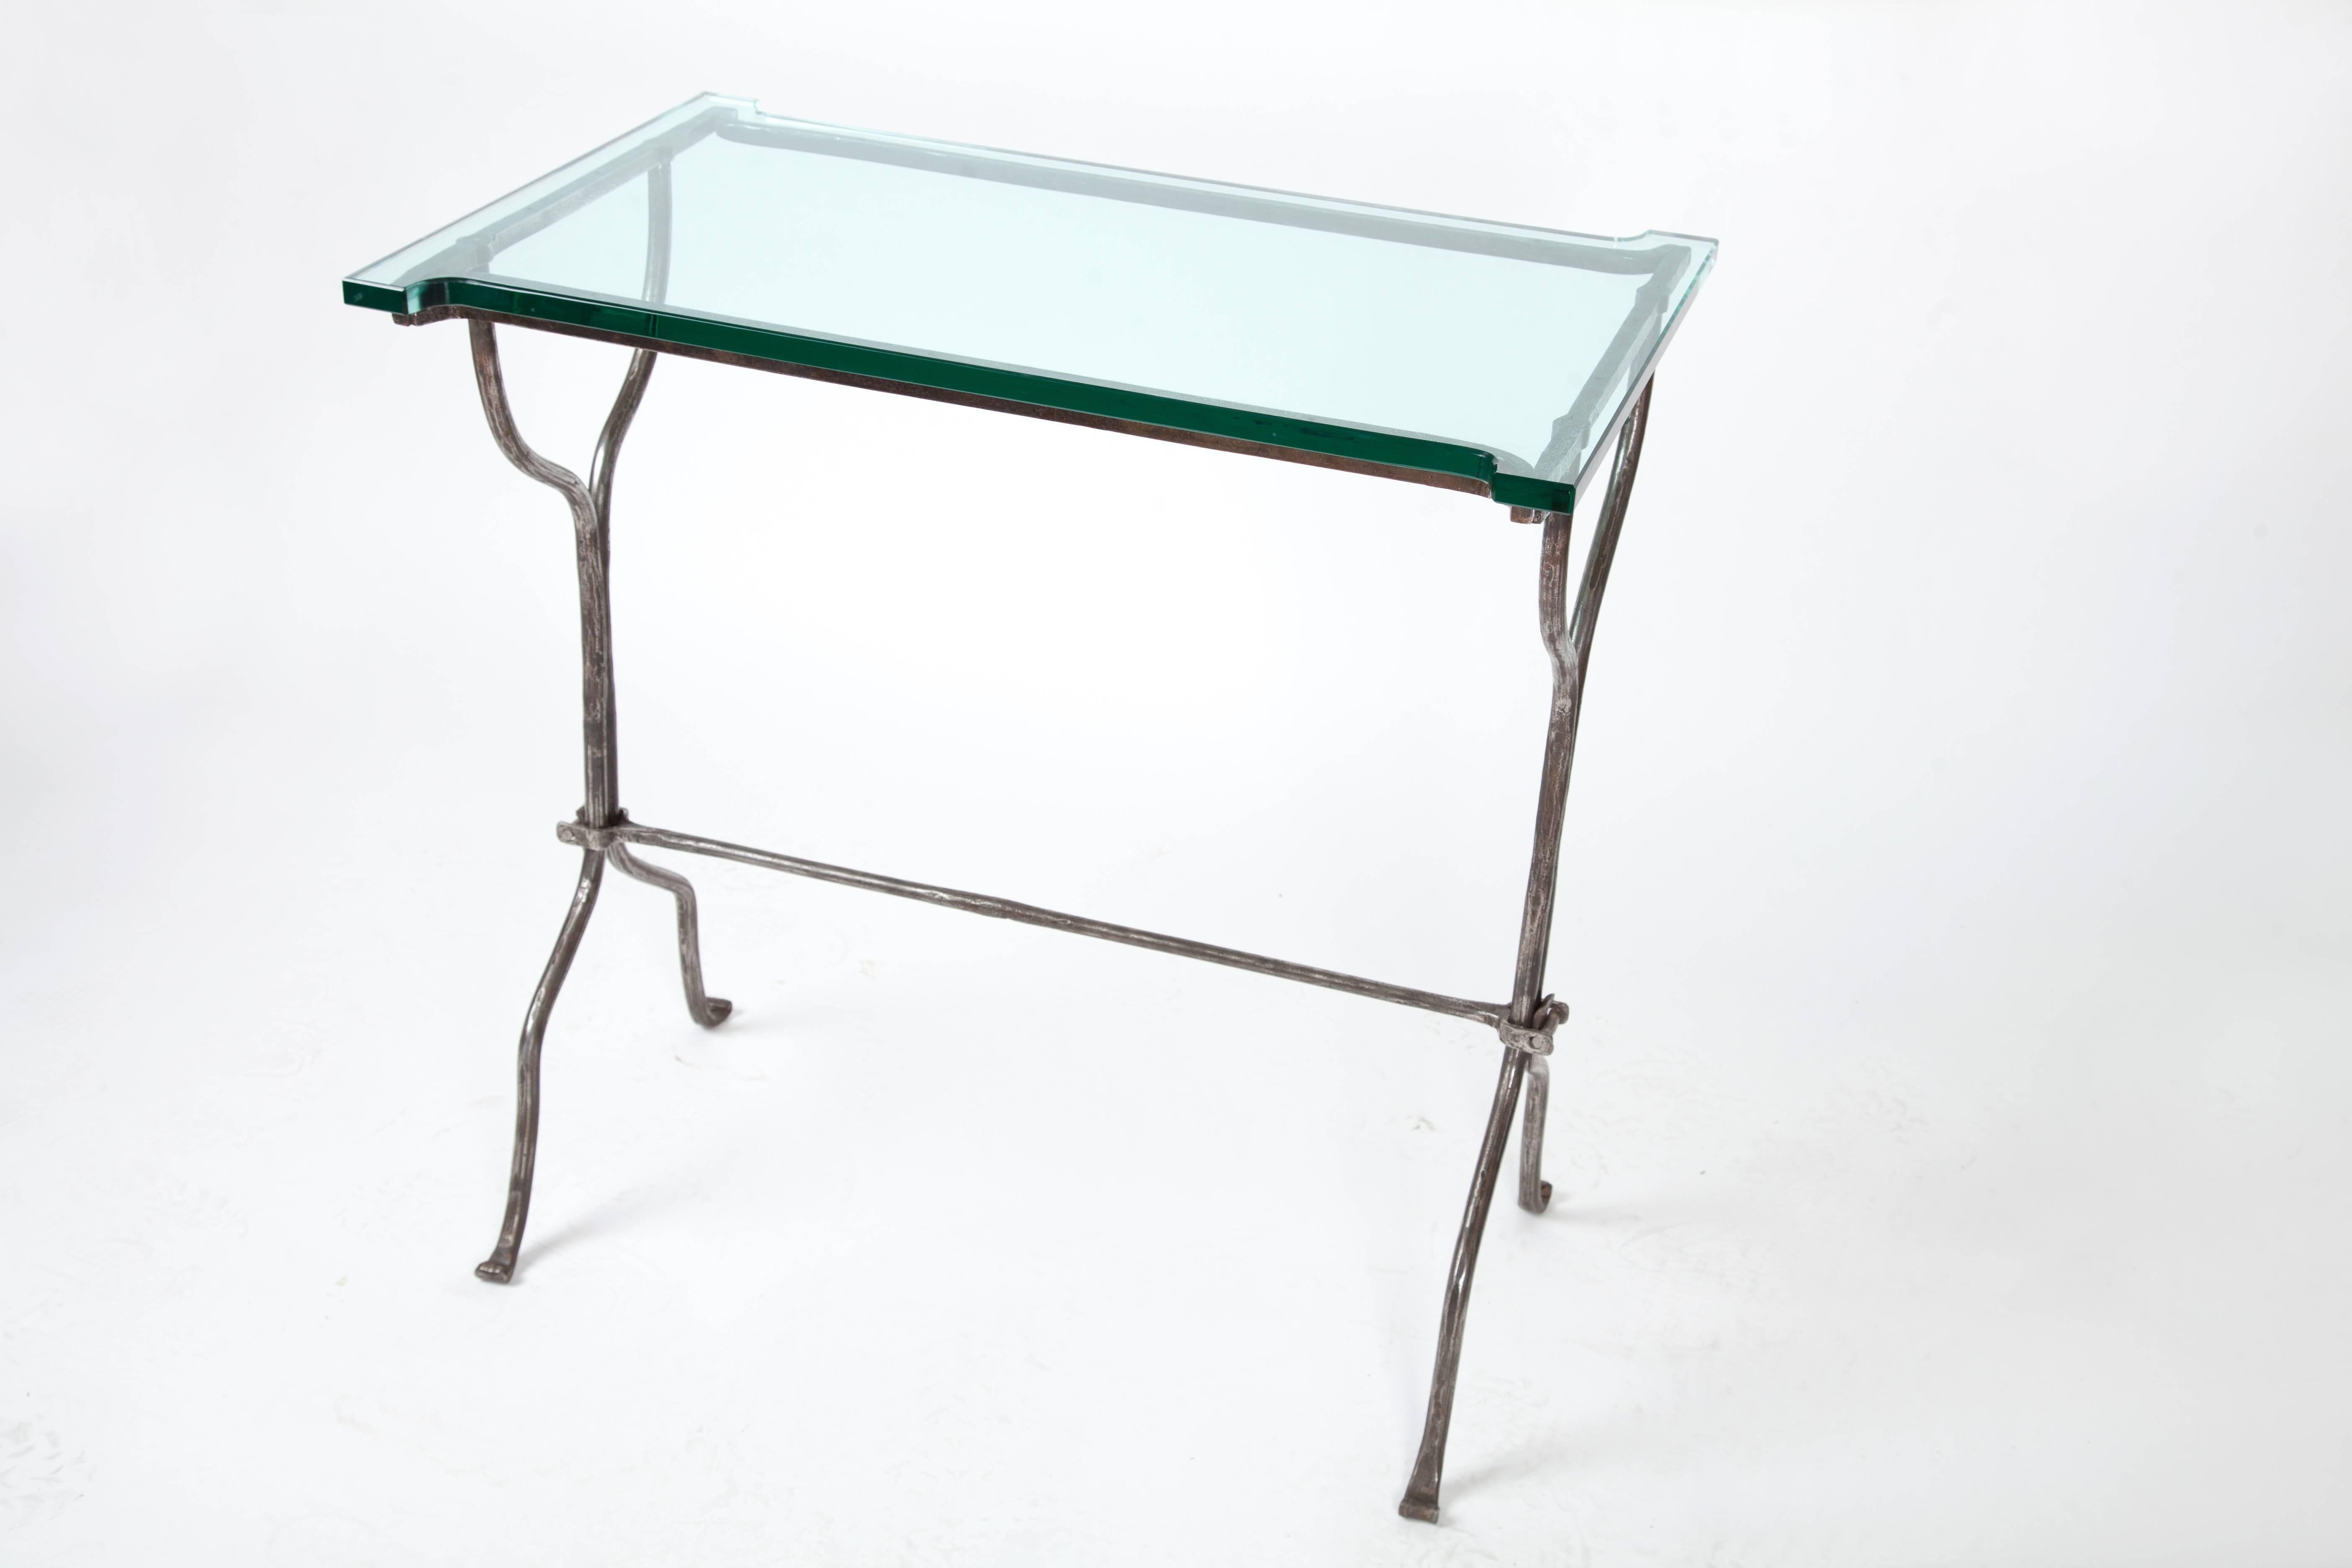 Hand-forged iron desk with a thick glass top.